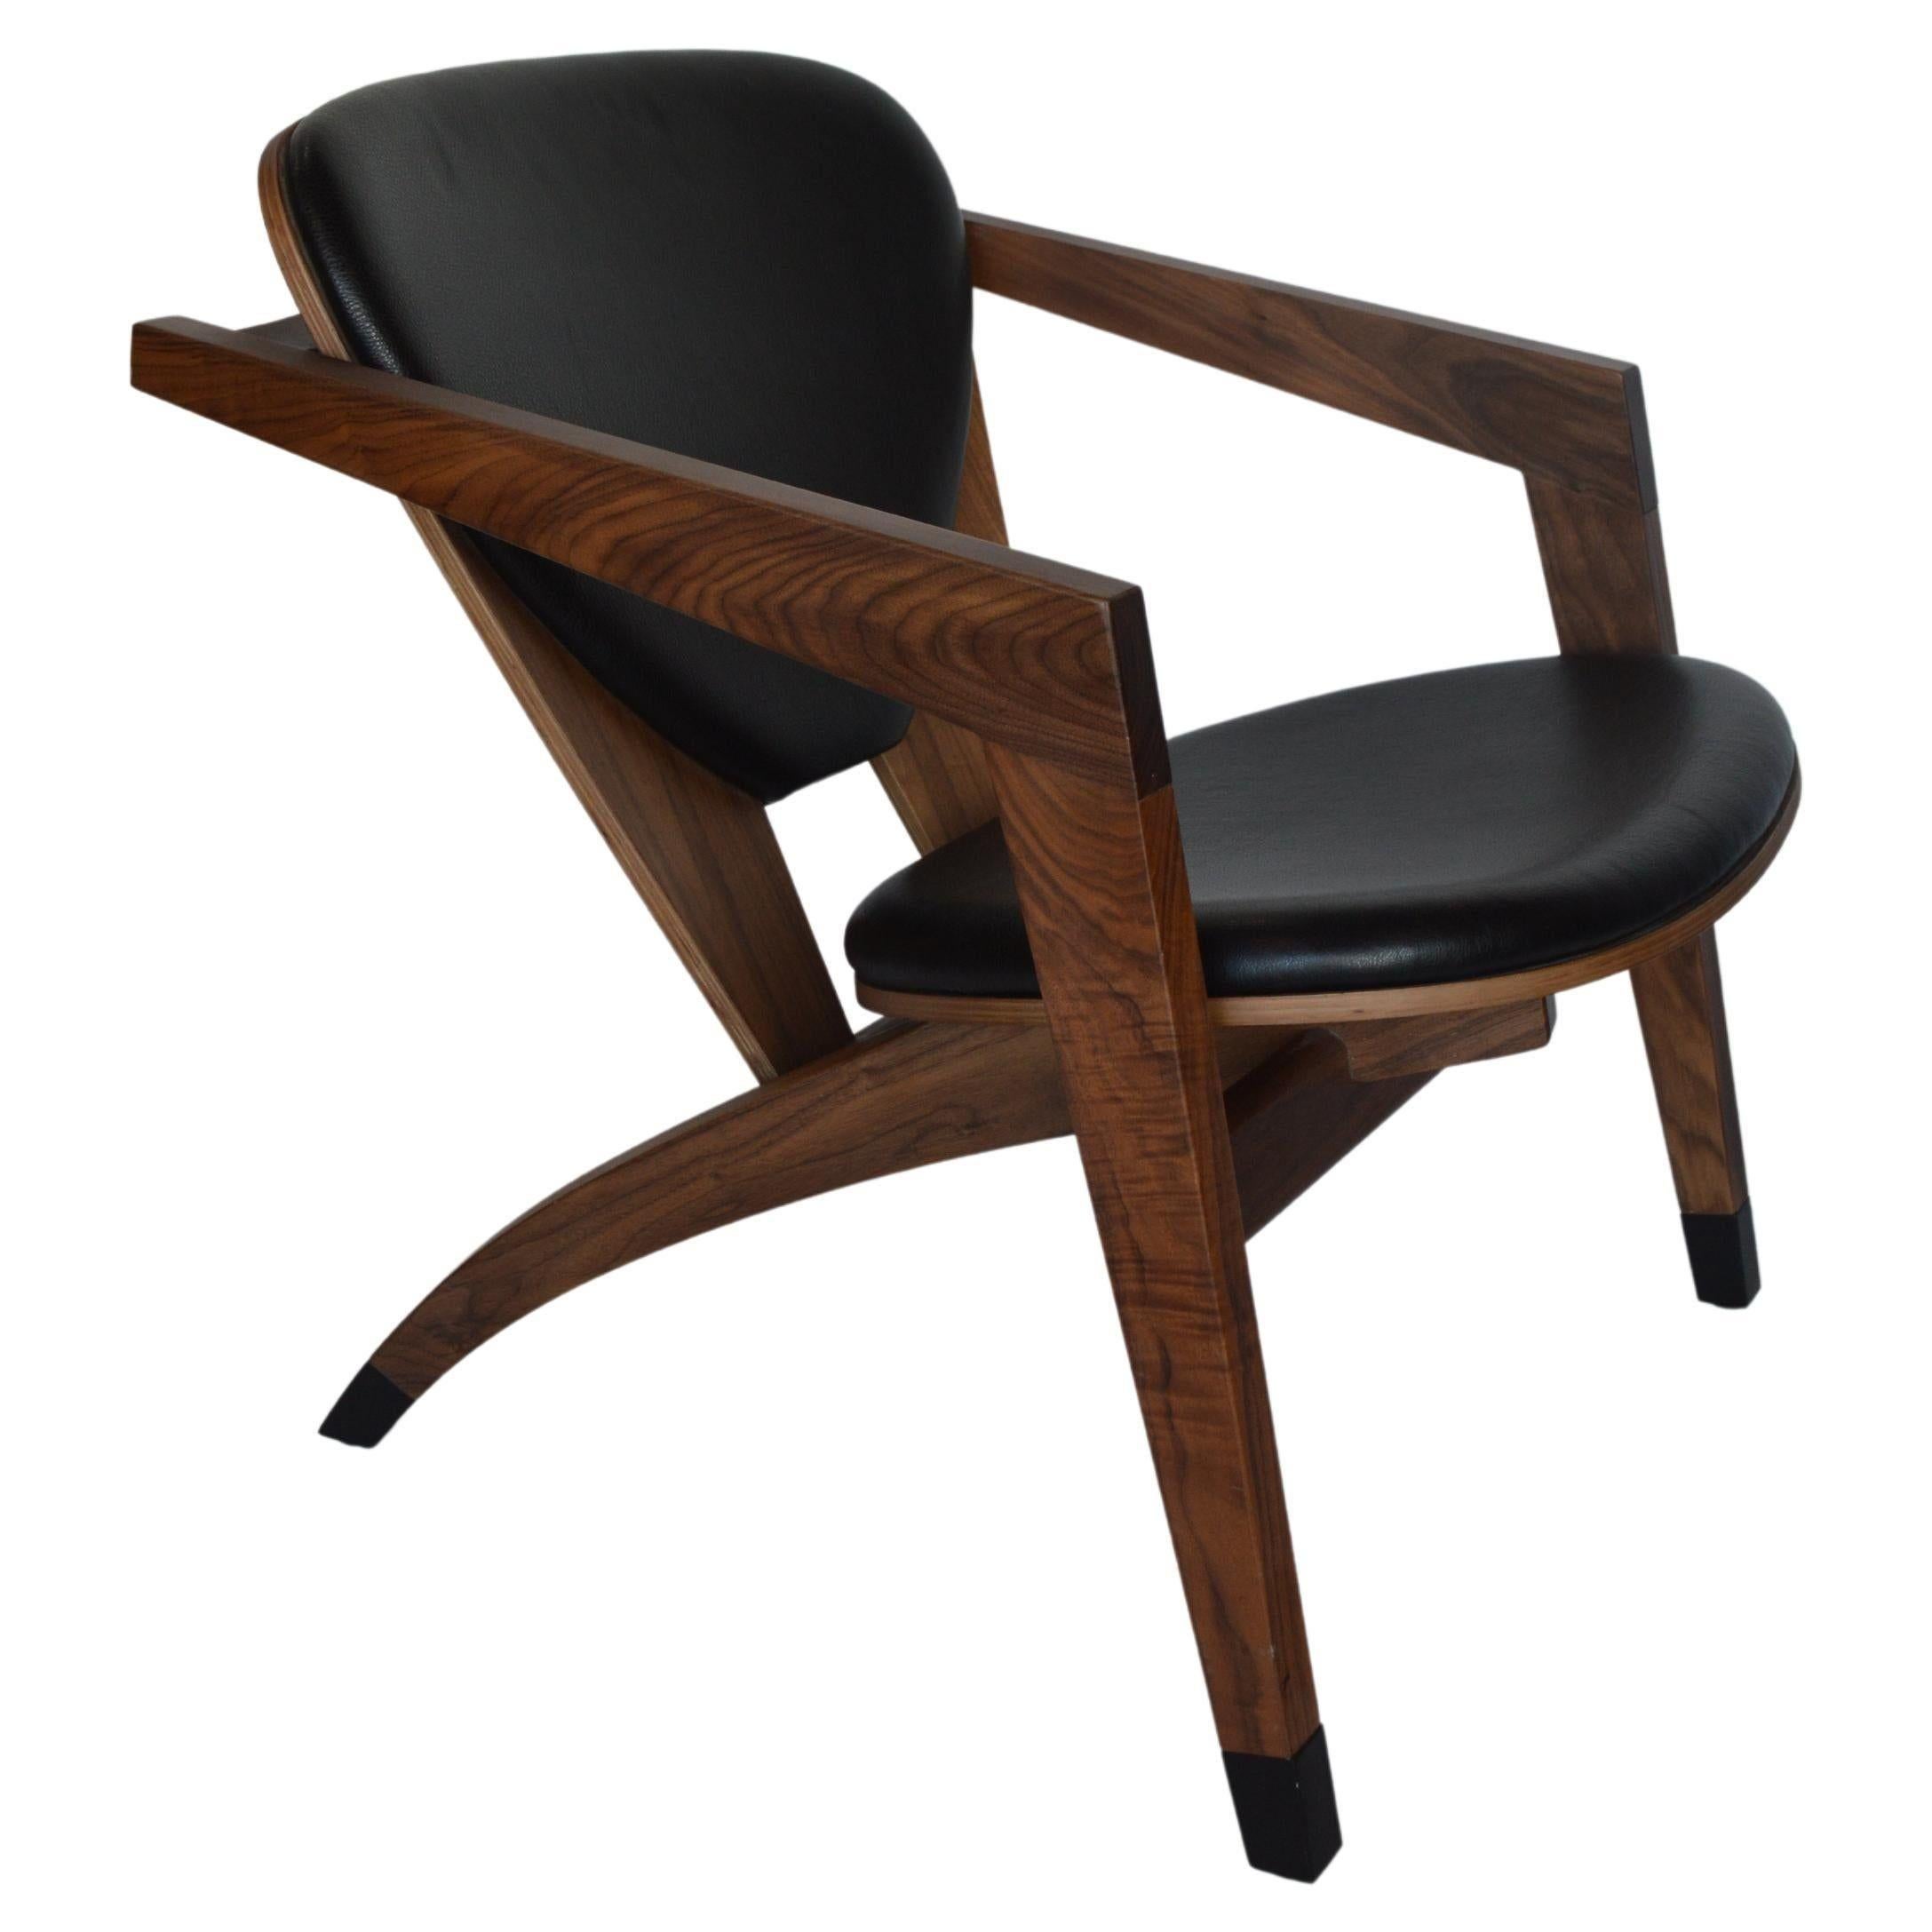 American modern walnut armchairs with leather upholstery. USA, 21st Century.